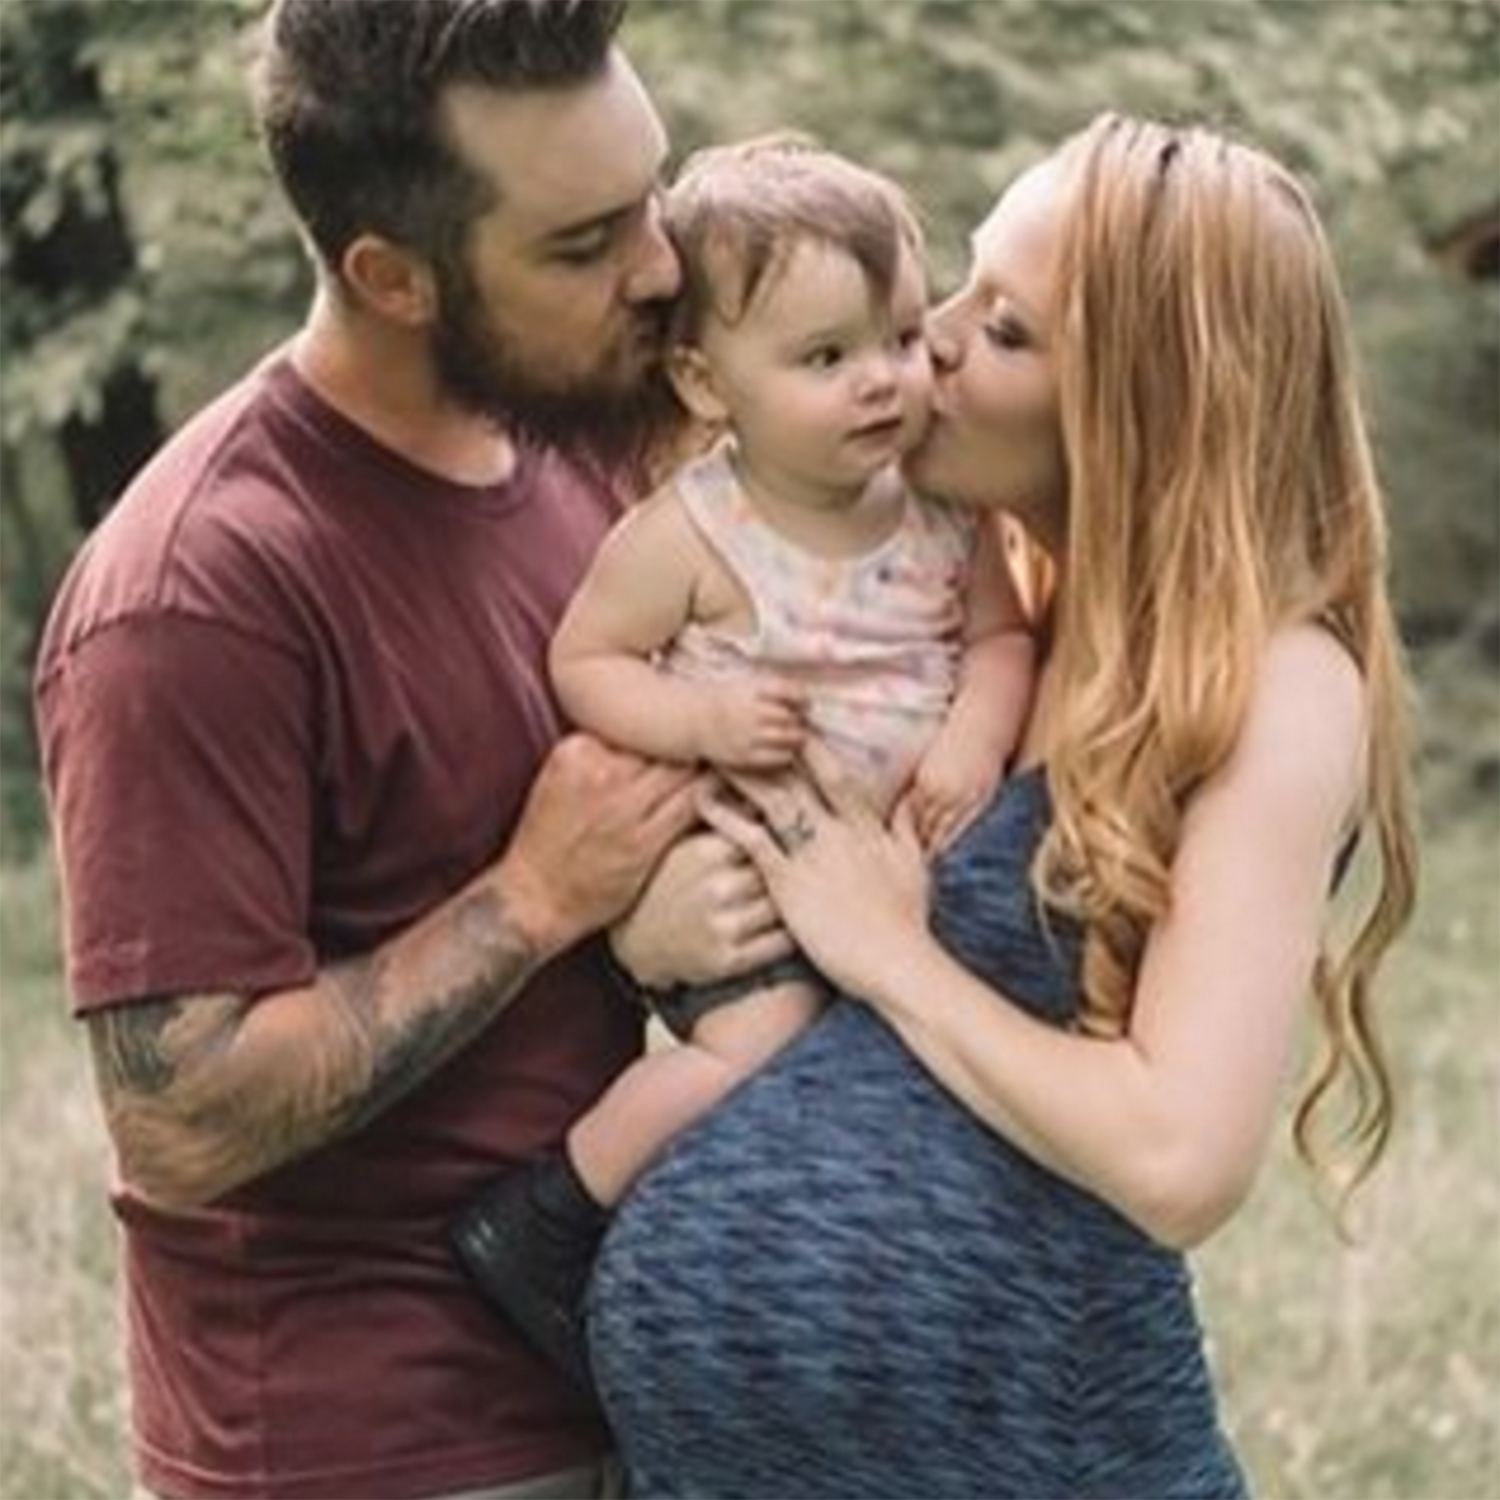 Maci Bookout Wishes Daughter Jayde Happy Birthday in Cute Pic